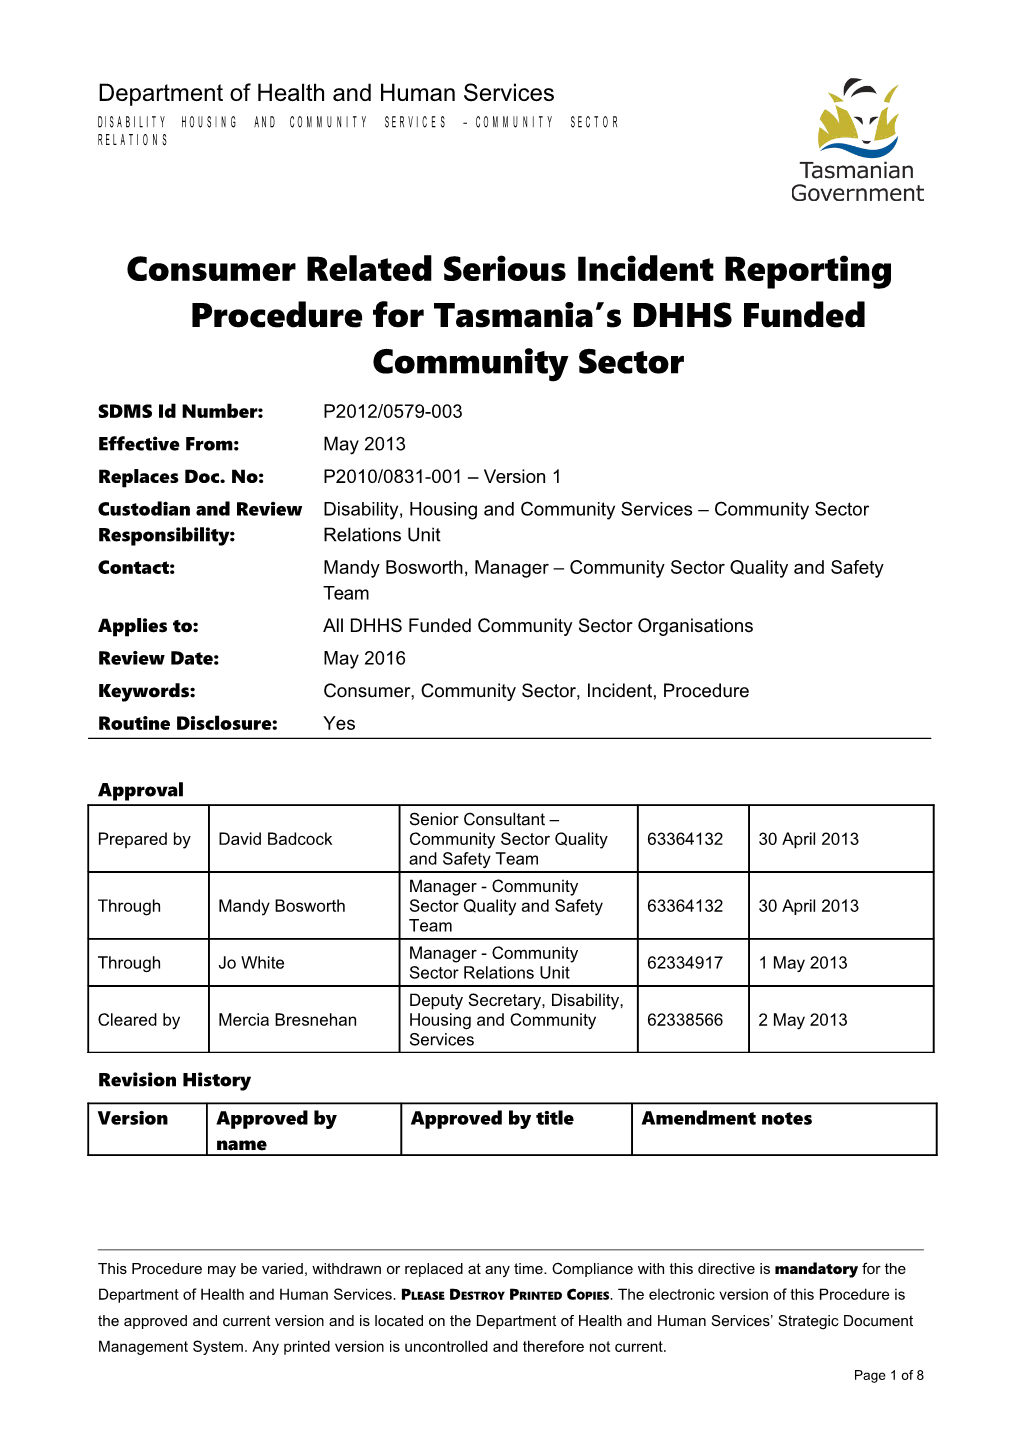 Consumer Related Serious Incident Reporting Procedure for Tasmania S DHHS Funded Community